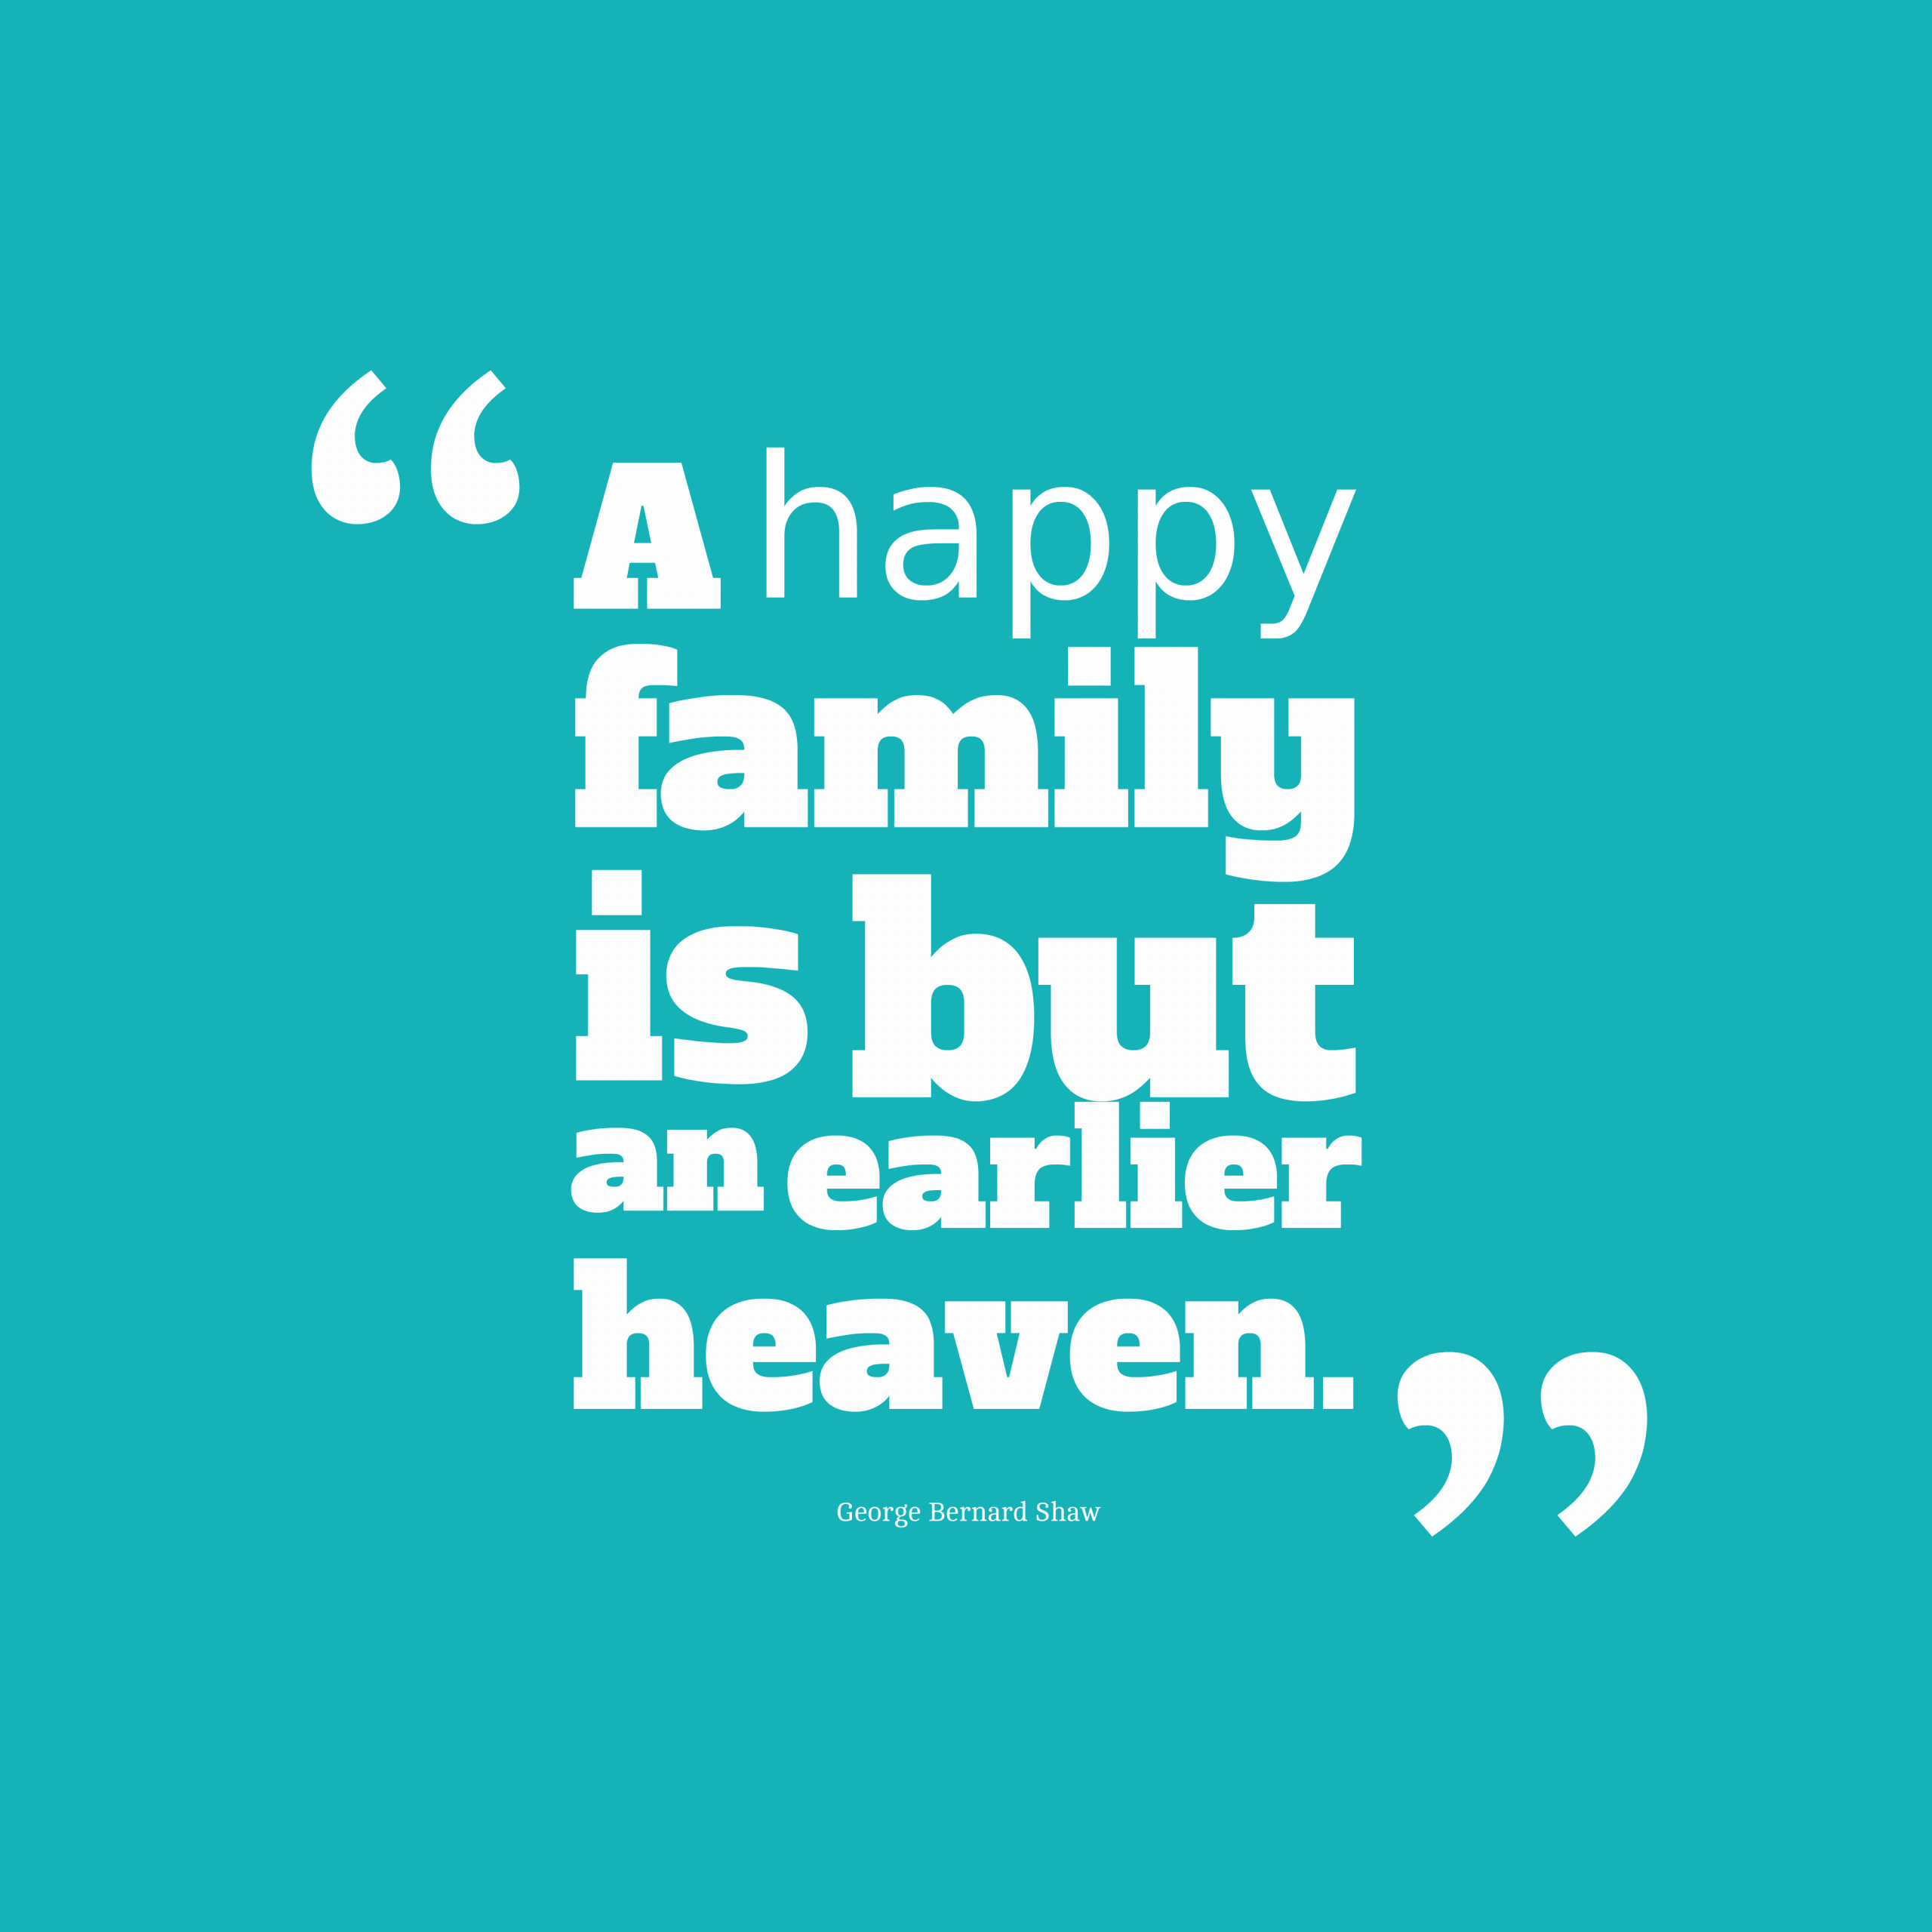 Family Inspirational Quotes
 100 Inspirational Family Quotes With Beautiful